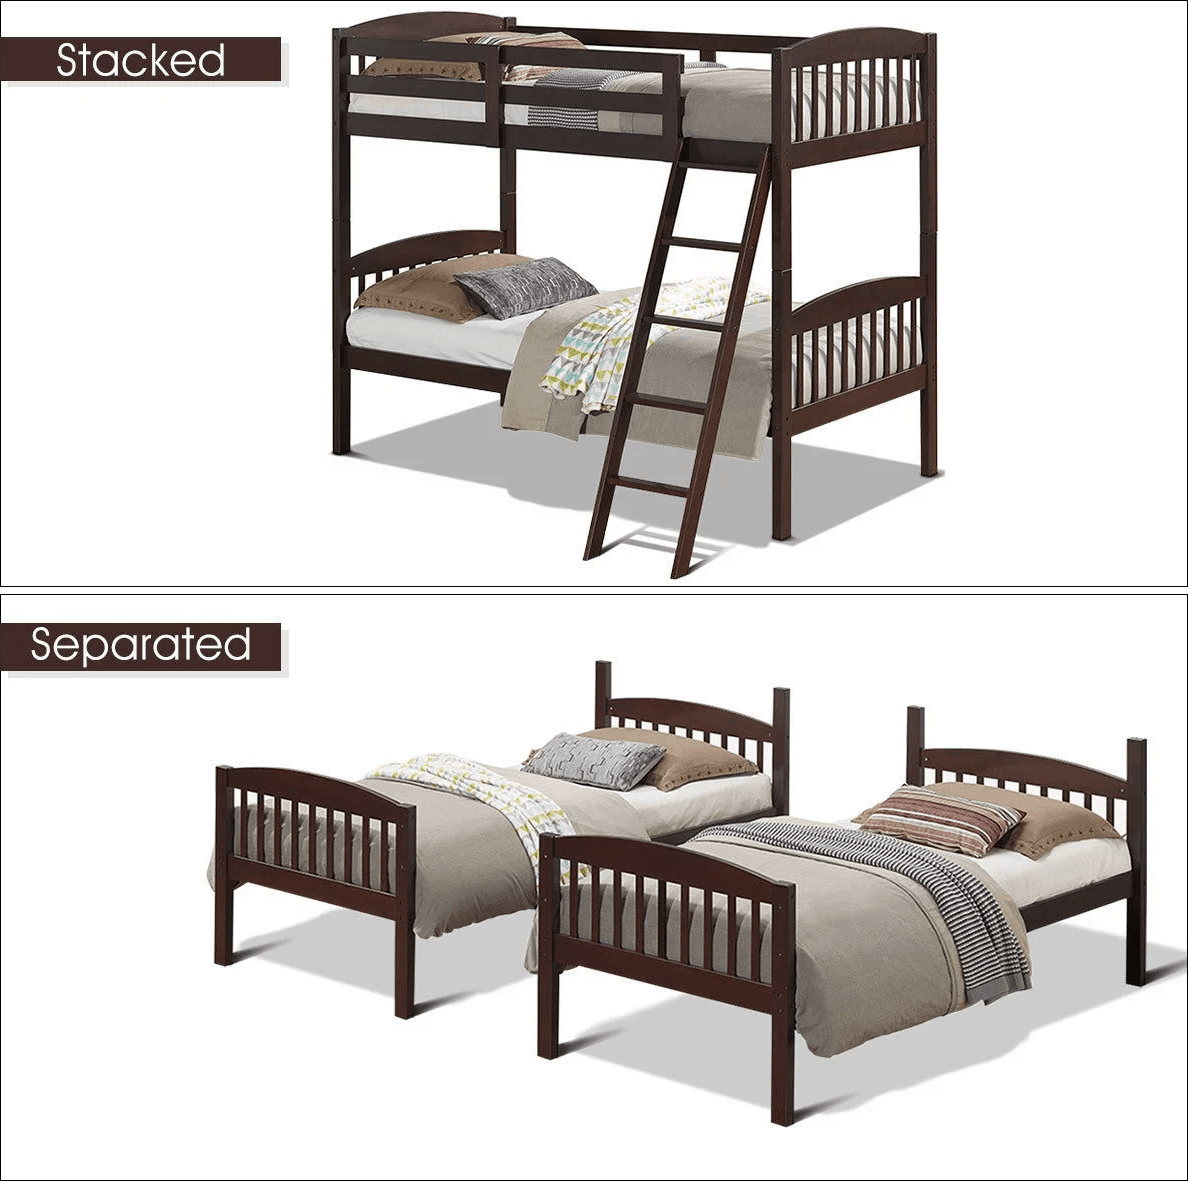 wooden bunk beds that separate